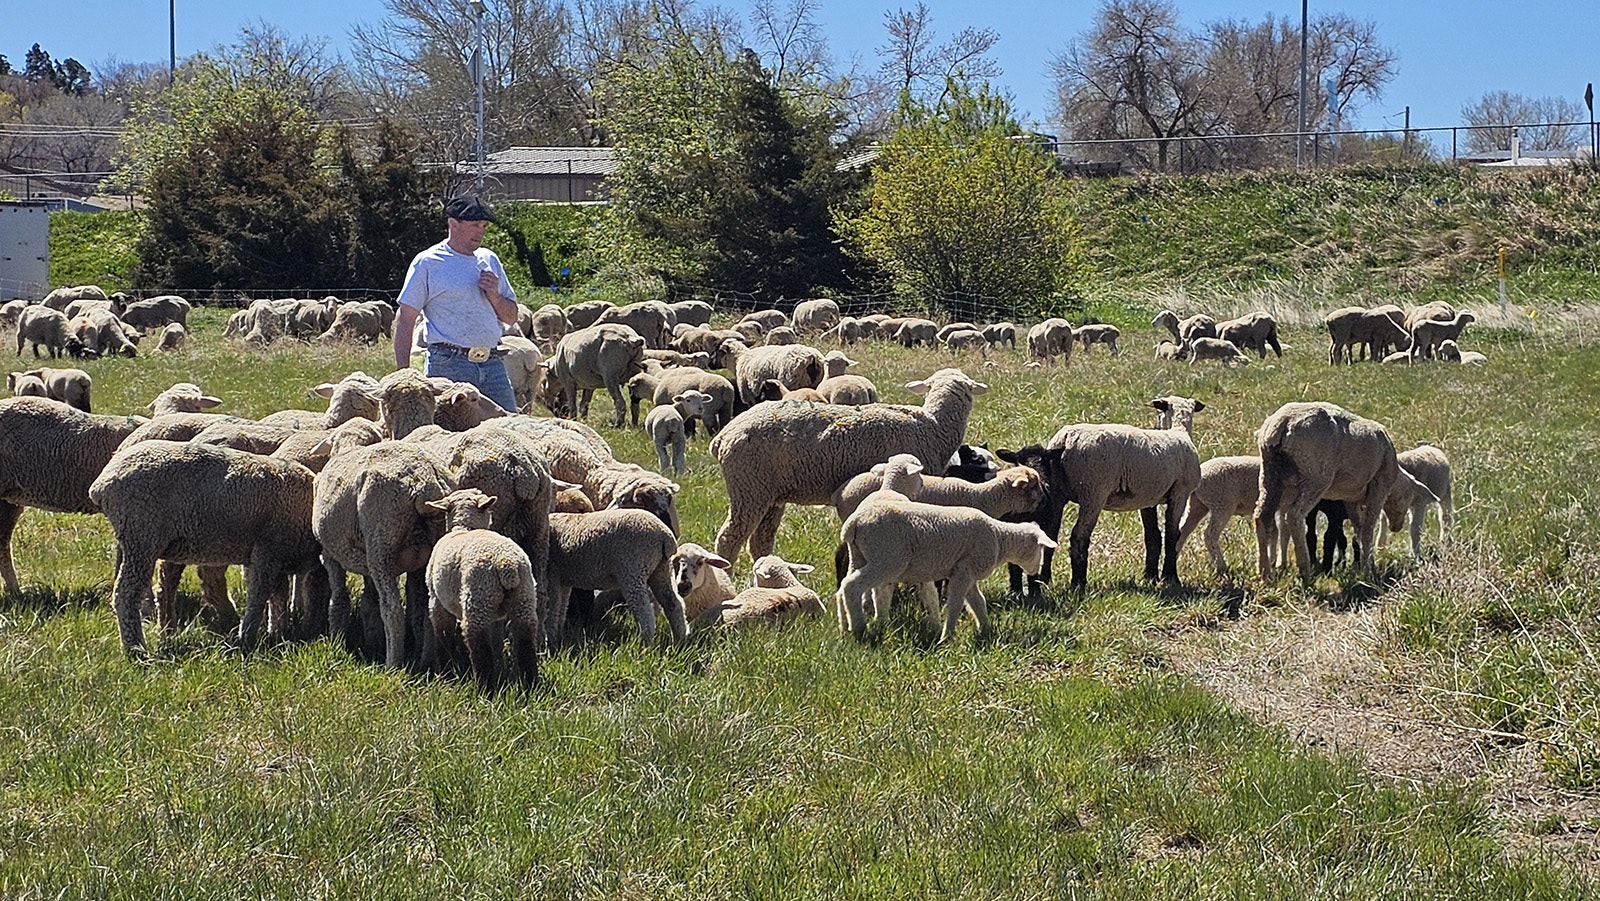 Mike Miller among his sheep at Gillette's third annual Sheepherding Festival.